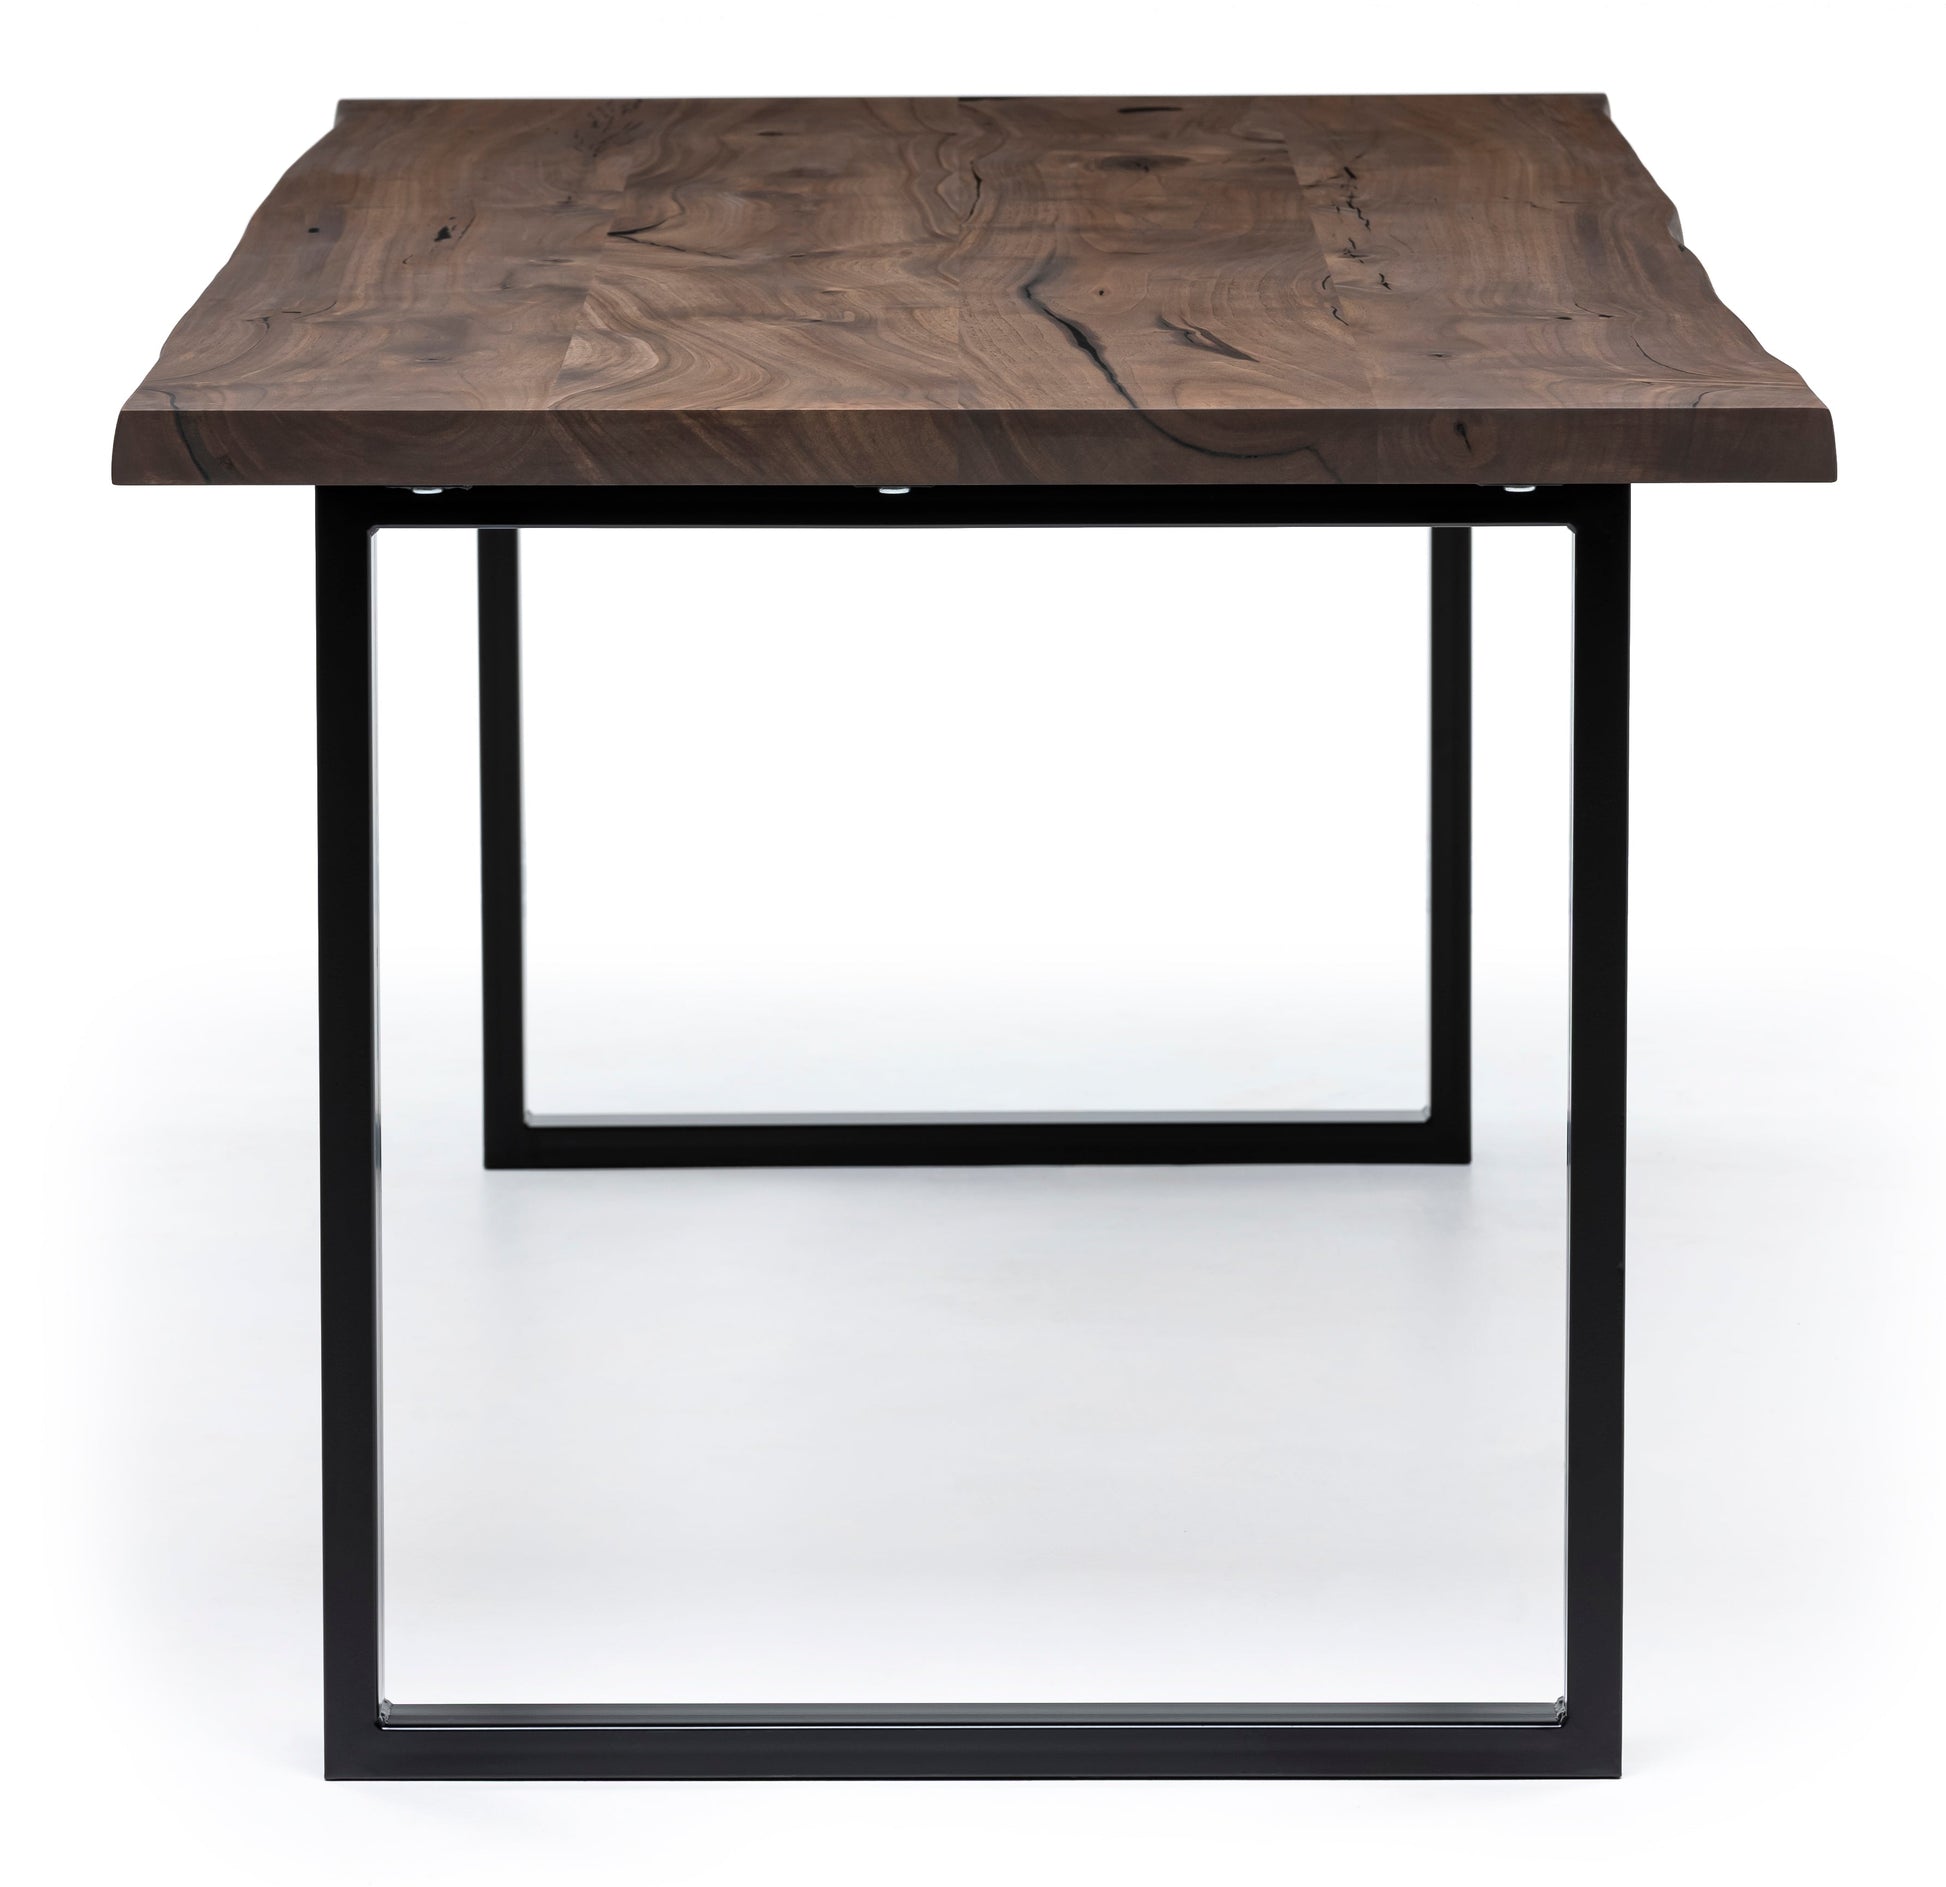 Chocolate Walnut Dining Table Extendable - S10Home